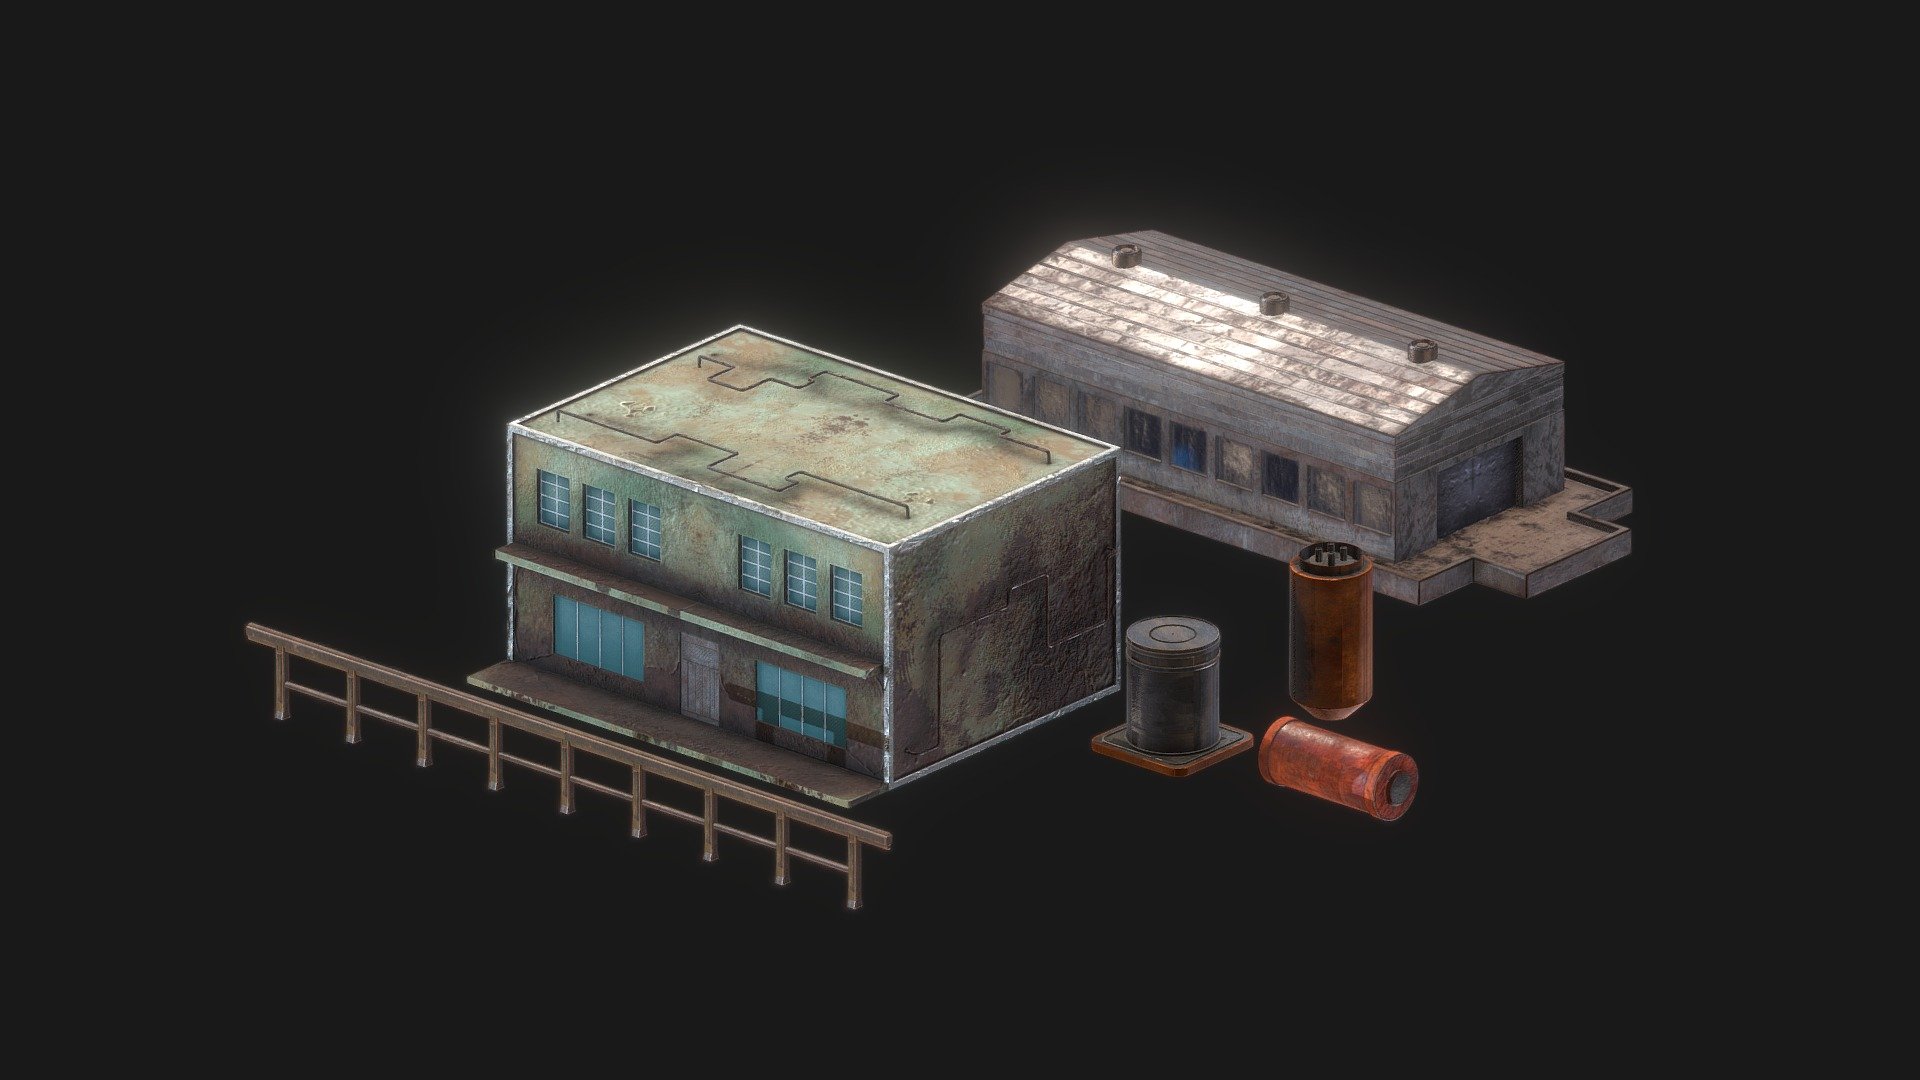 Random assets of an old industrial factory.

Made with Blender and Substance Painter 3d model